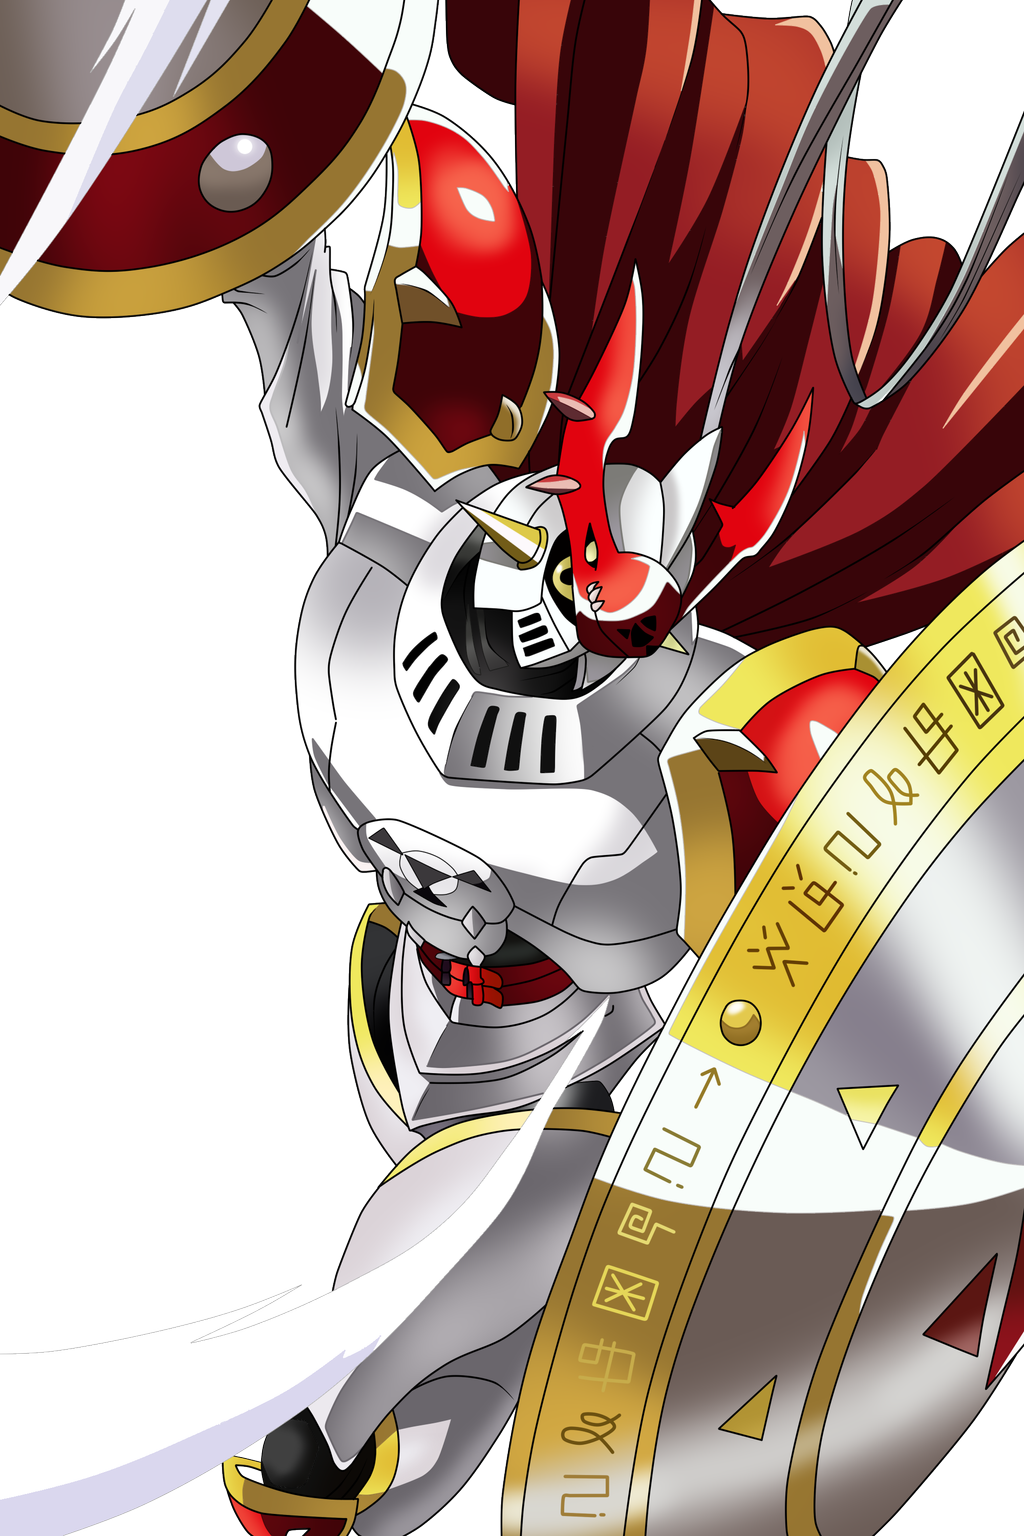 Dukemon Wallpaper. Dukemon Wallpaper, Chaos Dukemon Wallpaper HD and